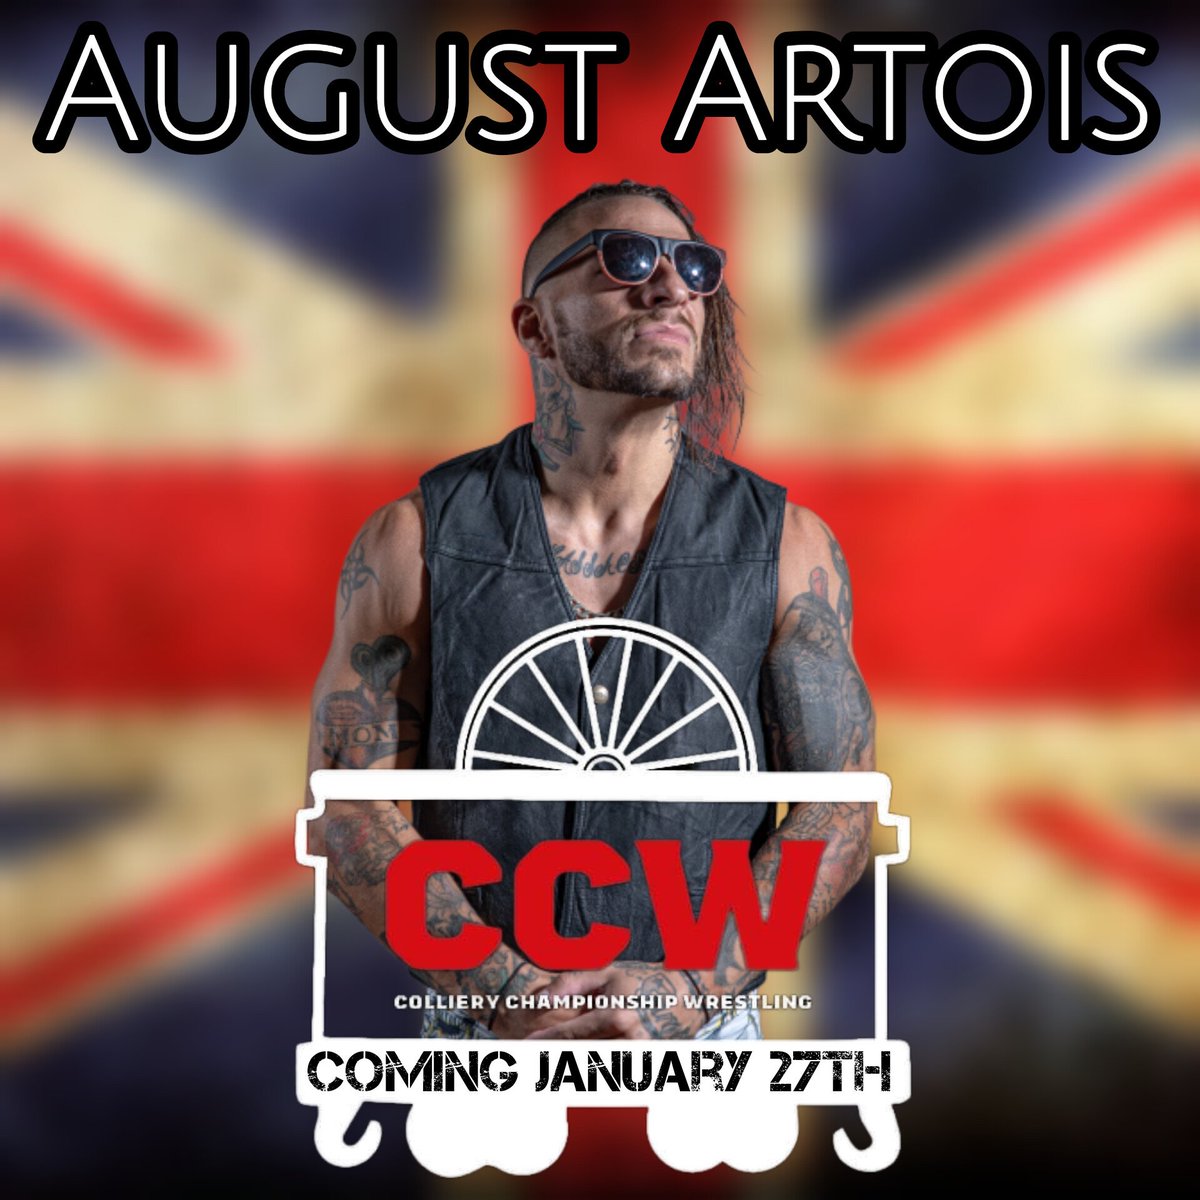 CCW Colliery Championship Wrestling is about to get Real and Raw!! August Artois heading over the pond 🇬🇧 1 Date Booked. Few More To Go!! #UkDebut